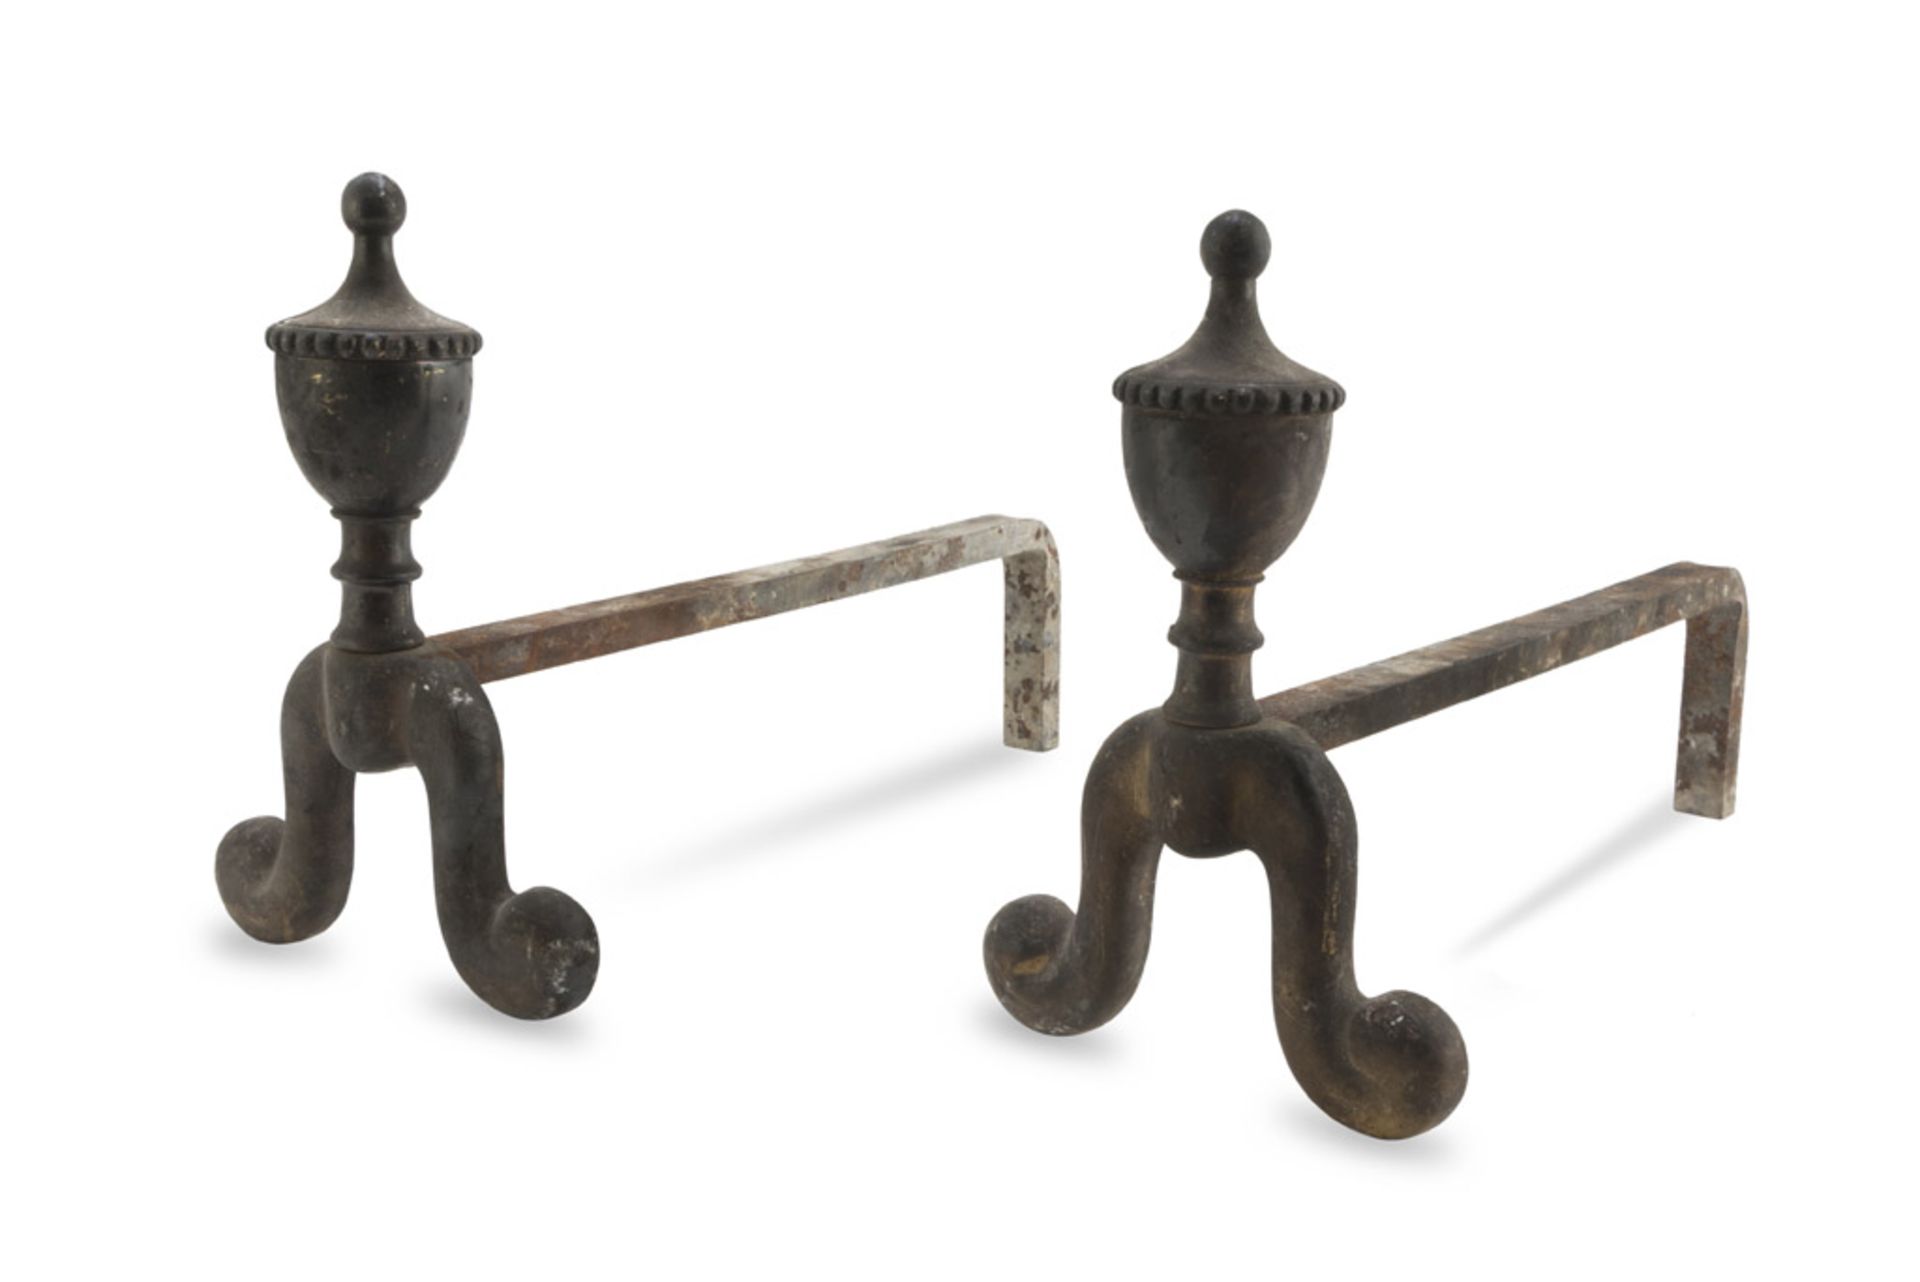 A PAIR OF SMALL FIREDOGS IN BRONZE, FRANCE LATE 18TH CENTURY with cup endings. Measures cm. 24 x